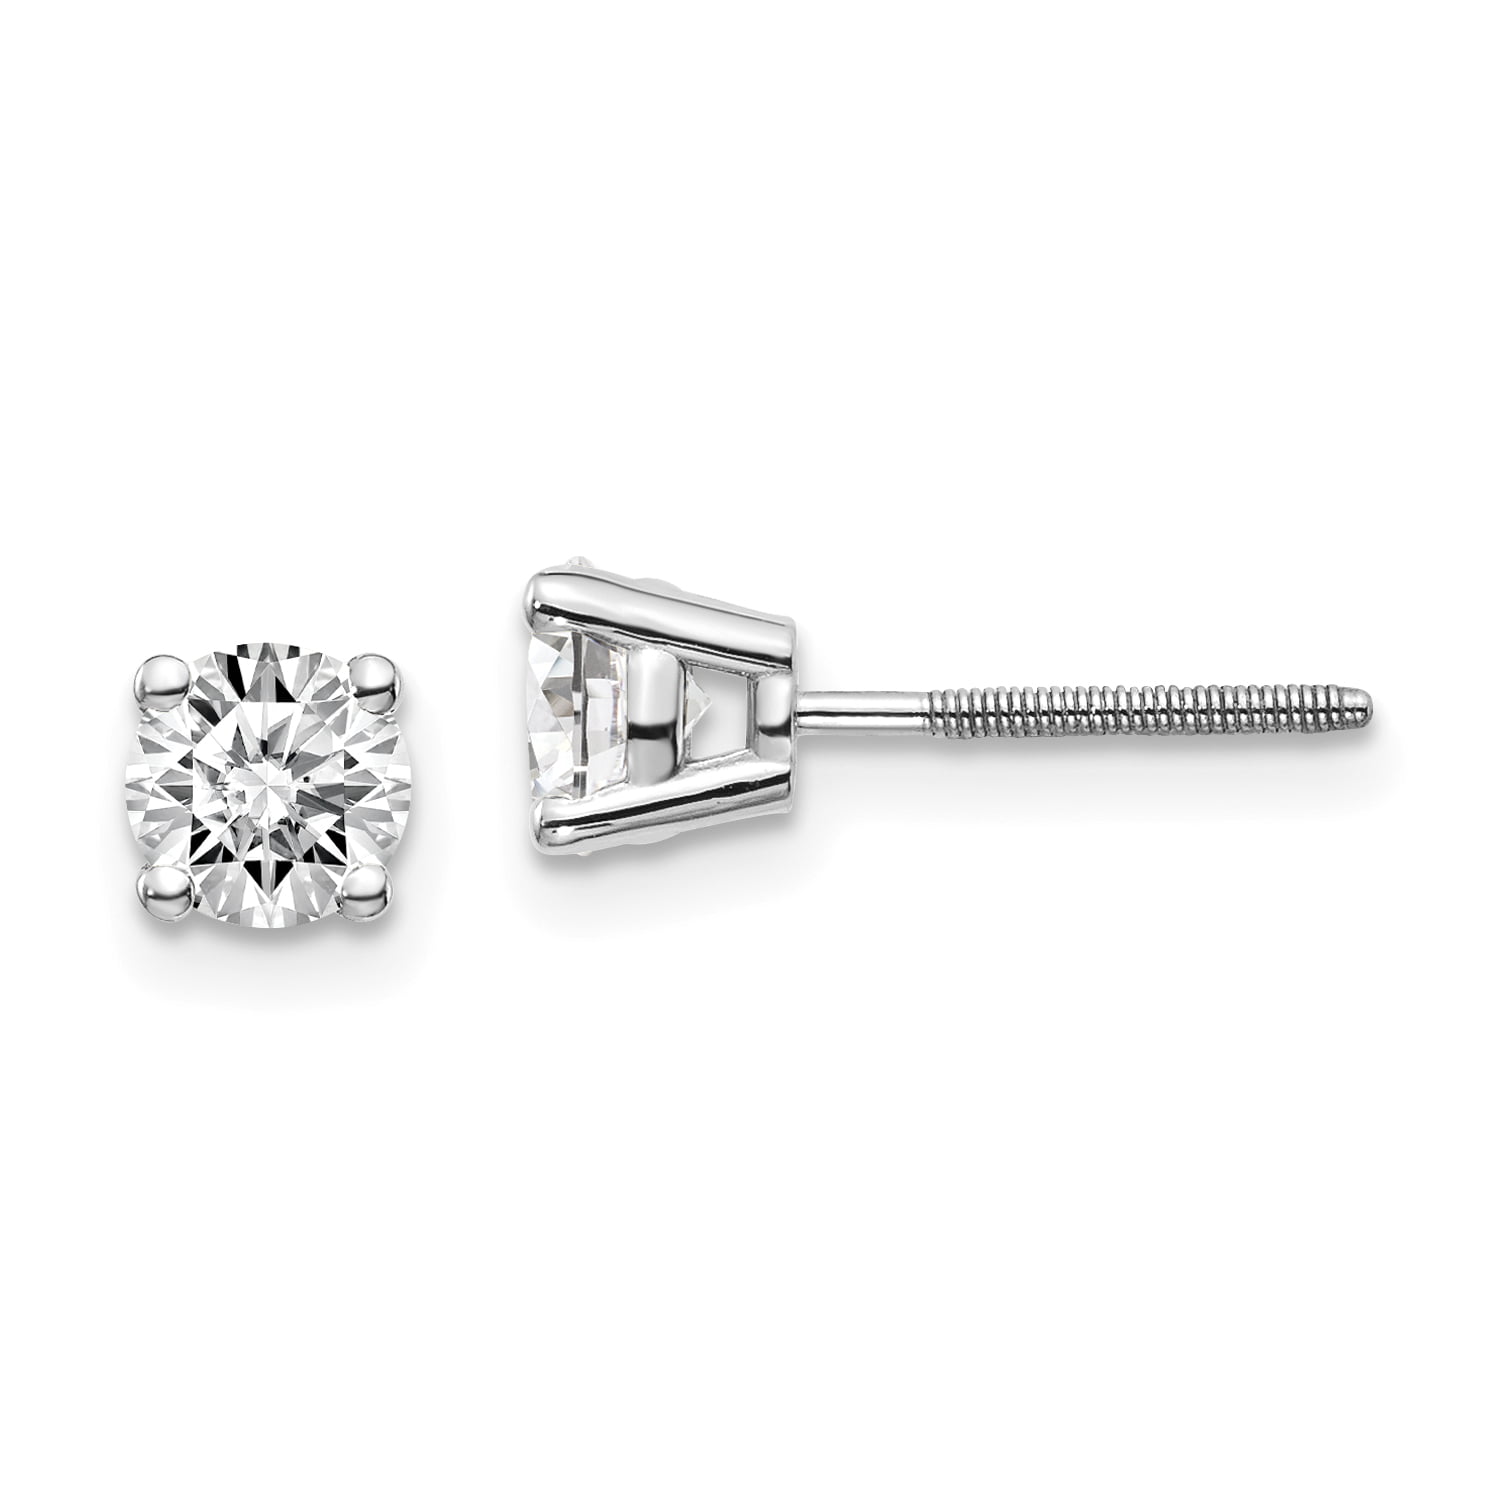 Gift For Mother Solitaire Studs Earrings 0.85Ct I1 G Genuine Diamond White Gold